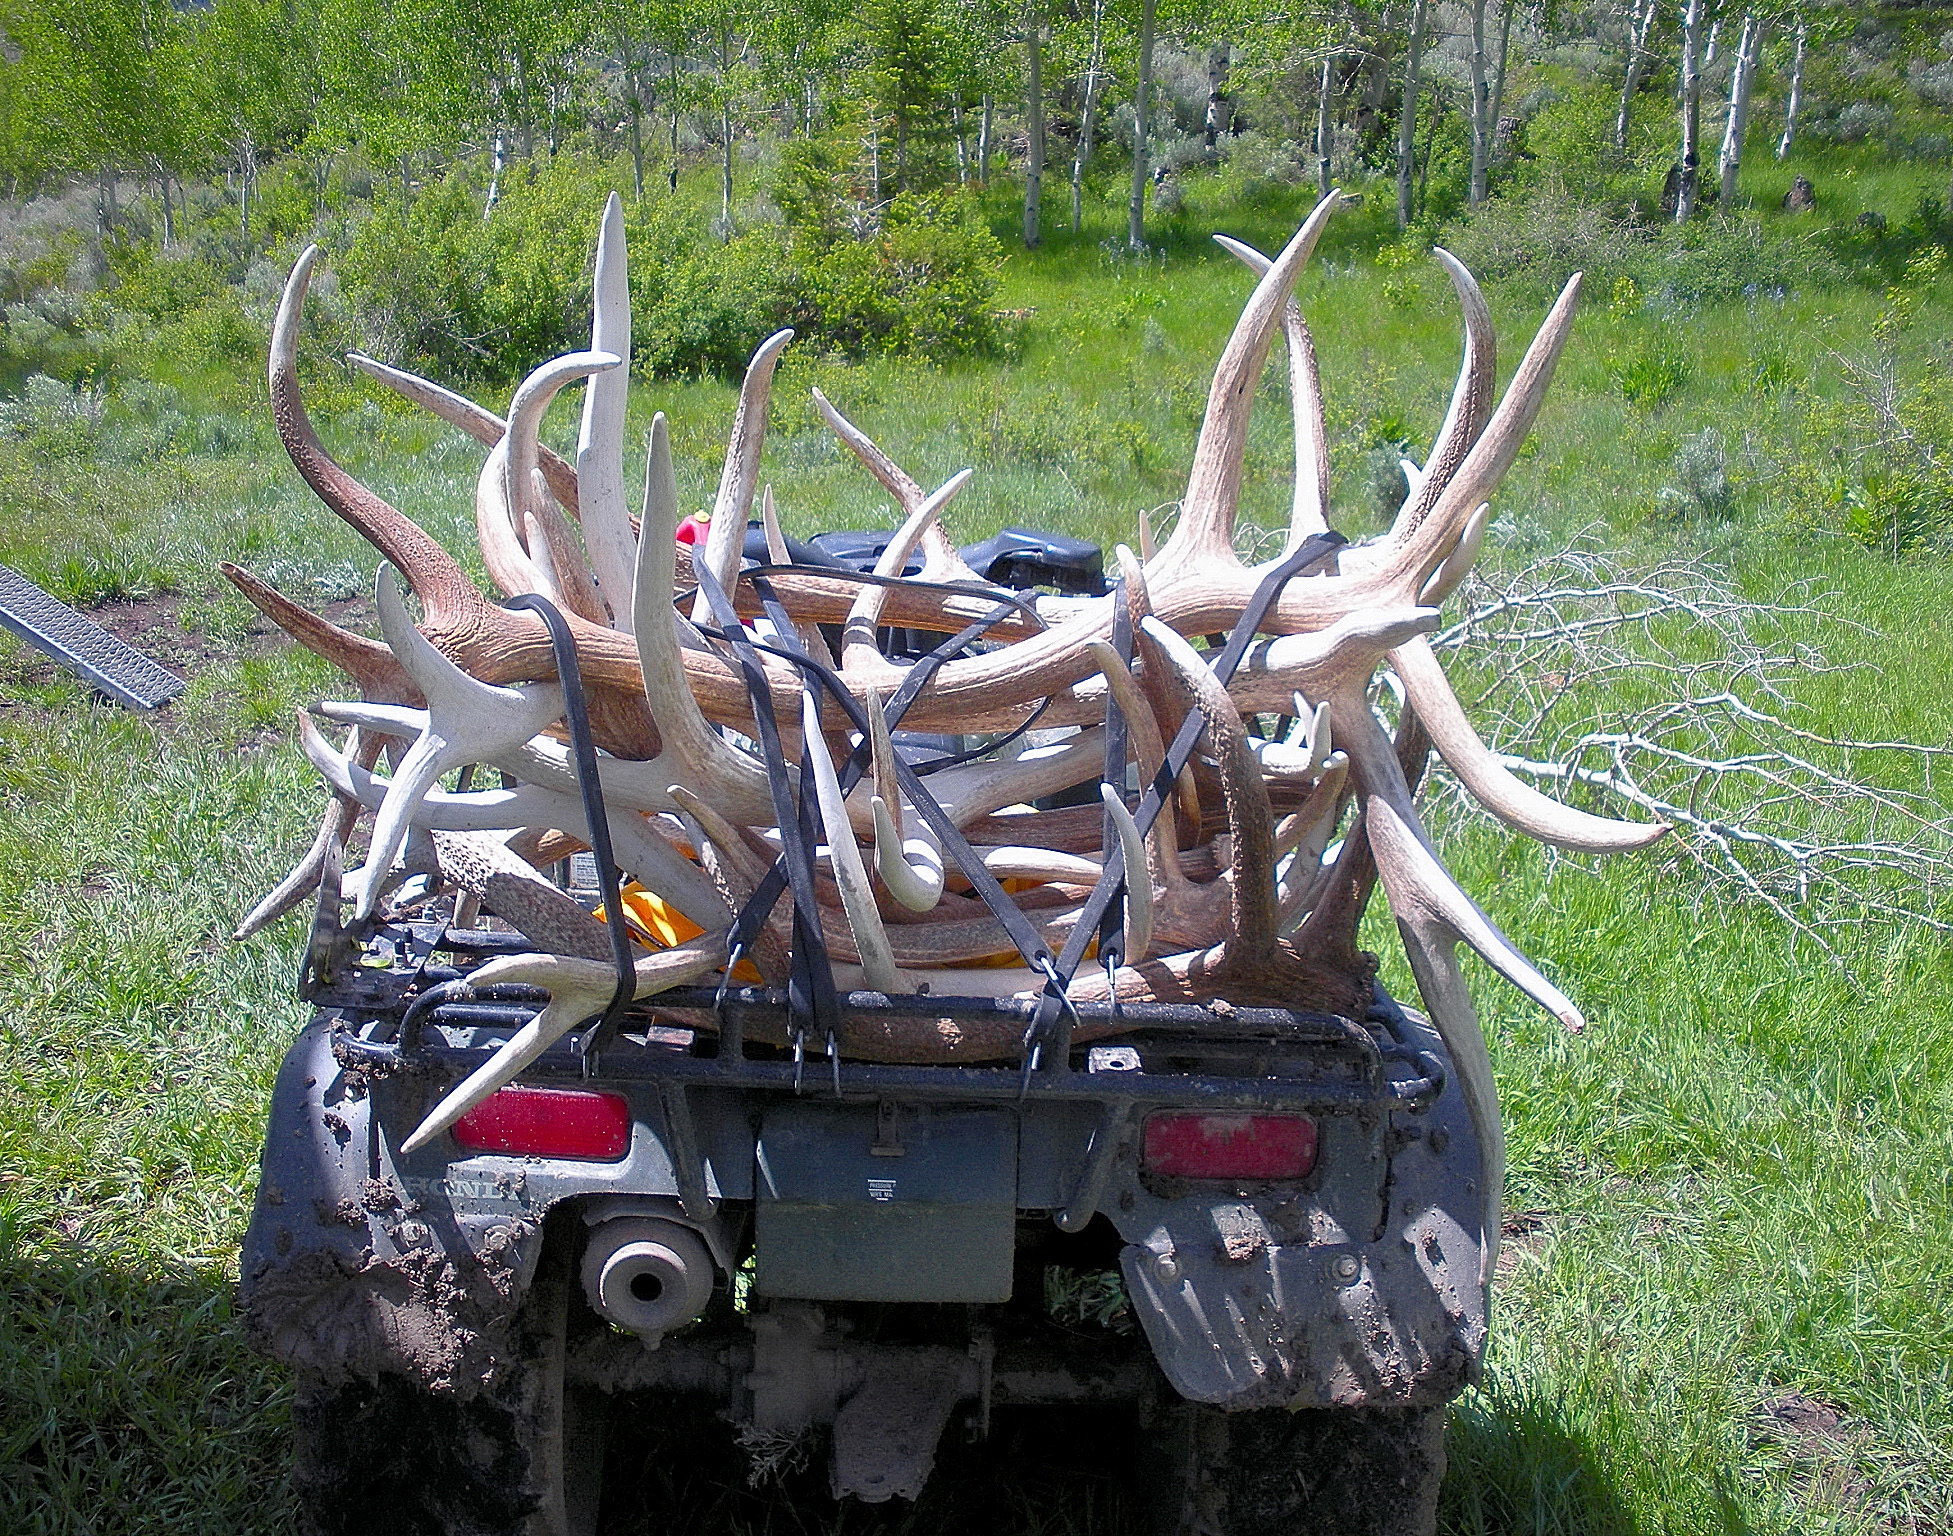 Shed Antlers